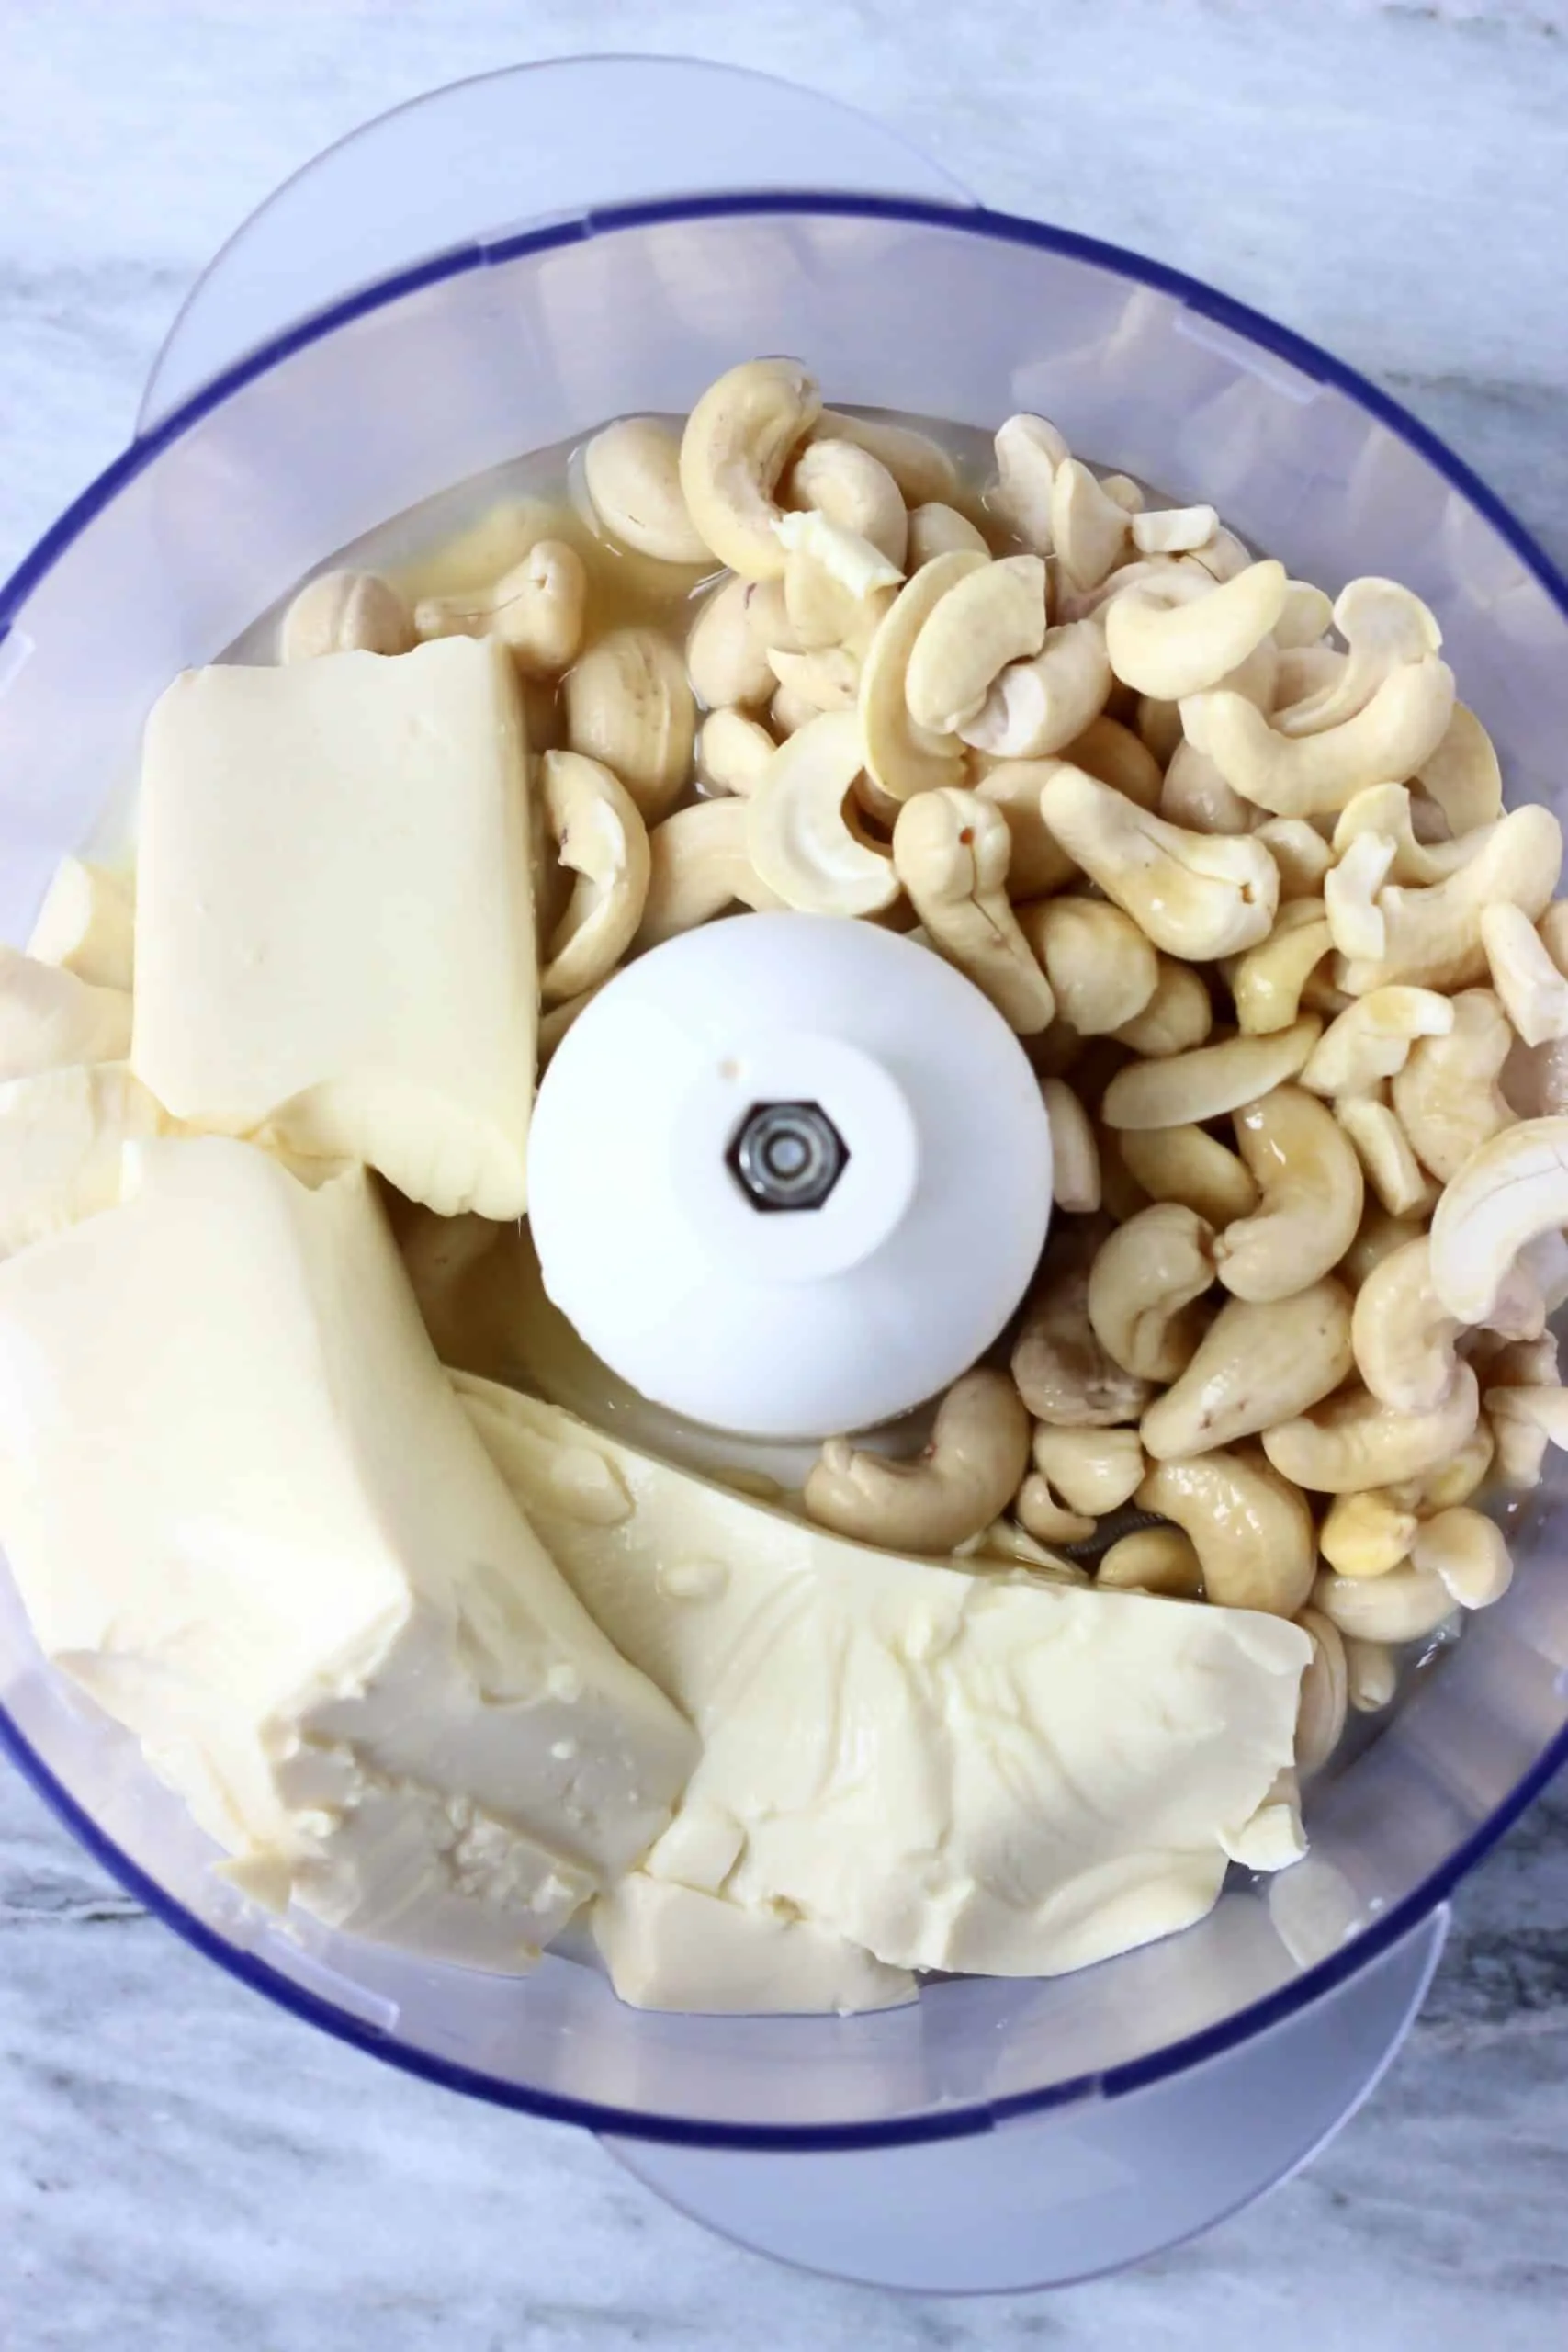 Cashew nuts, silken tofu, lemon juice and maple syrup in a food processor